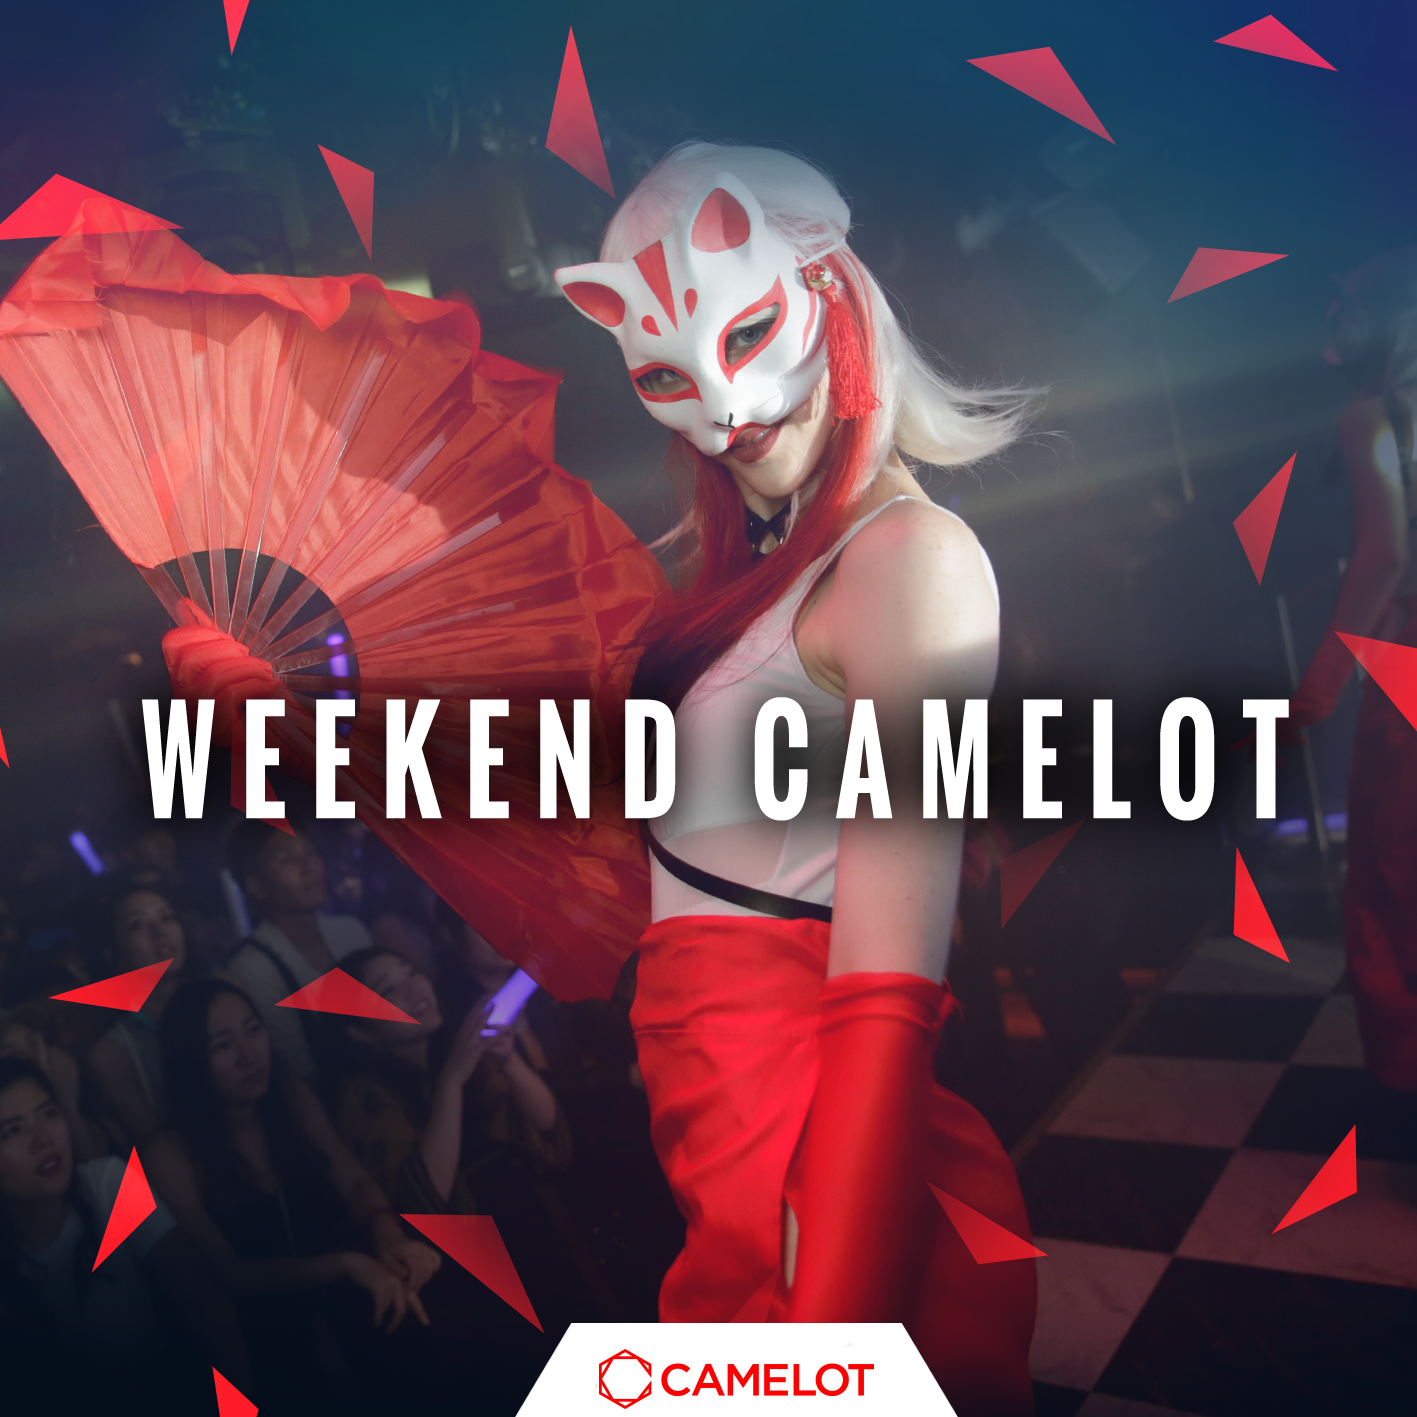 Weekend-Camelot.png